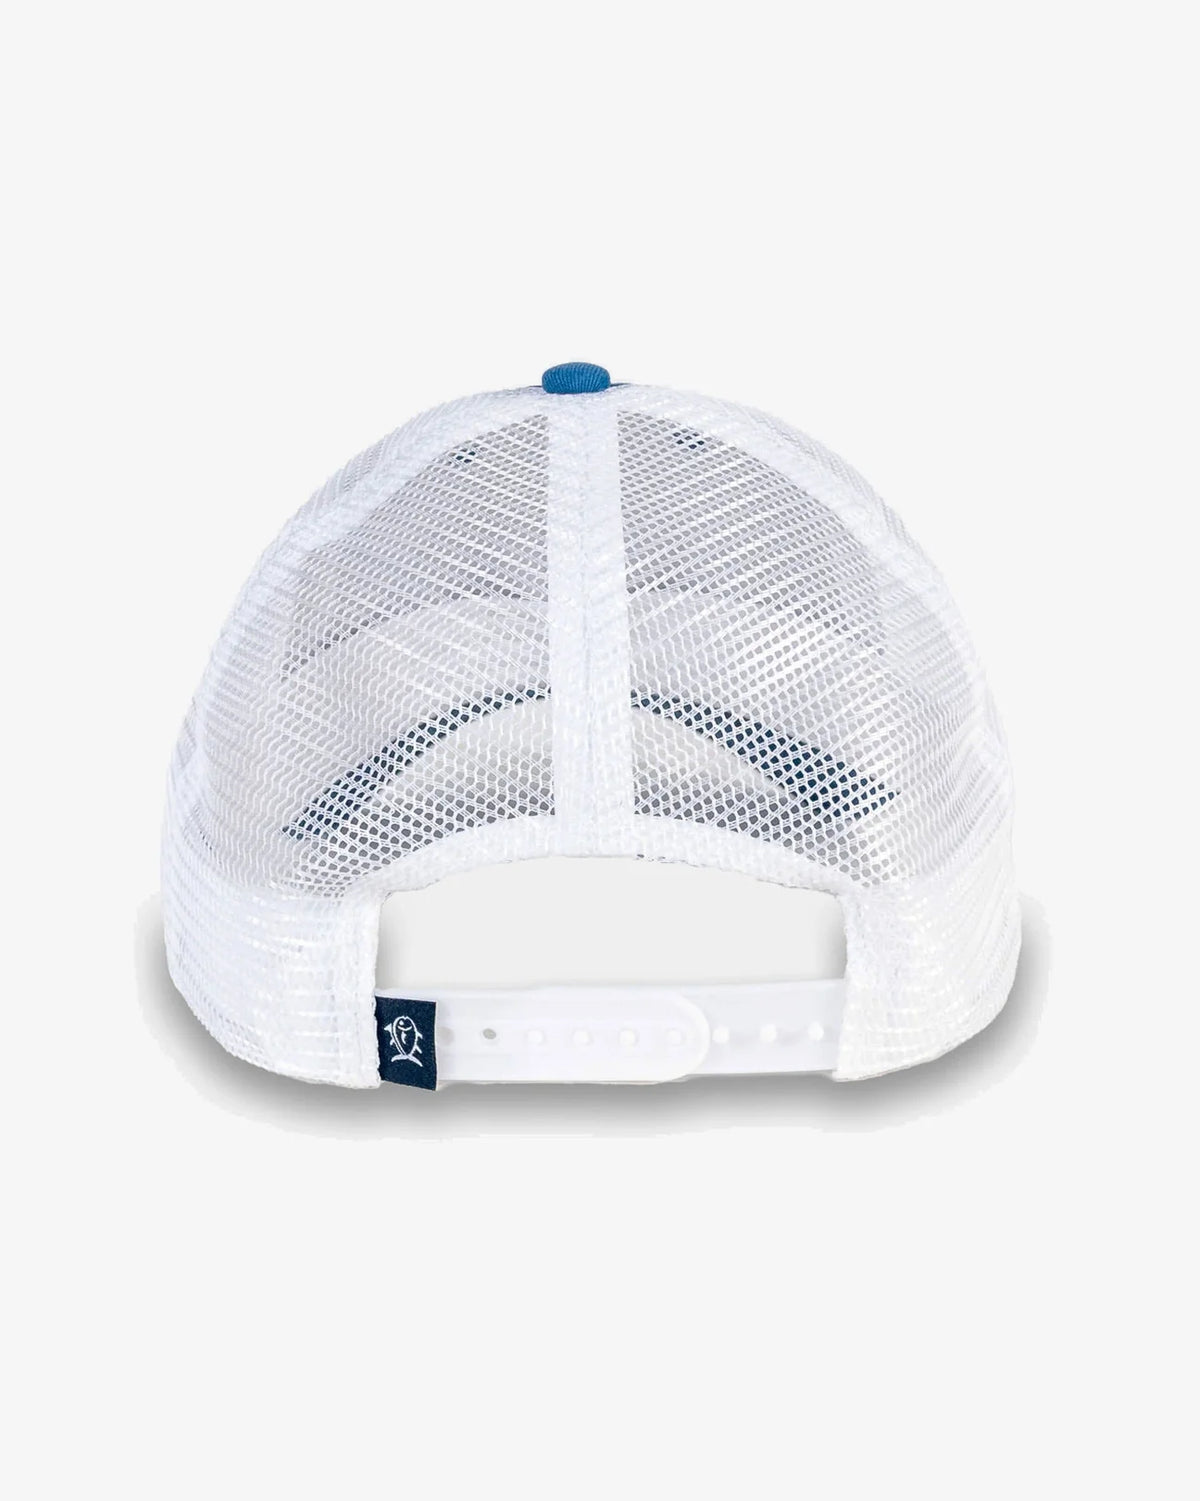 Southern Tide Coastal Expedition Trucker Hat - White